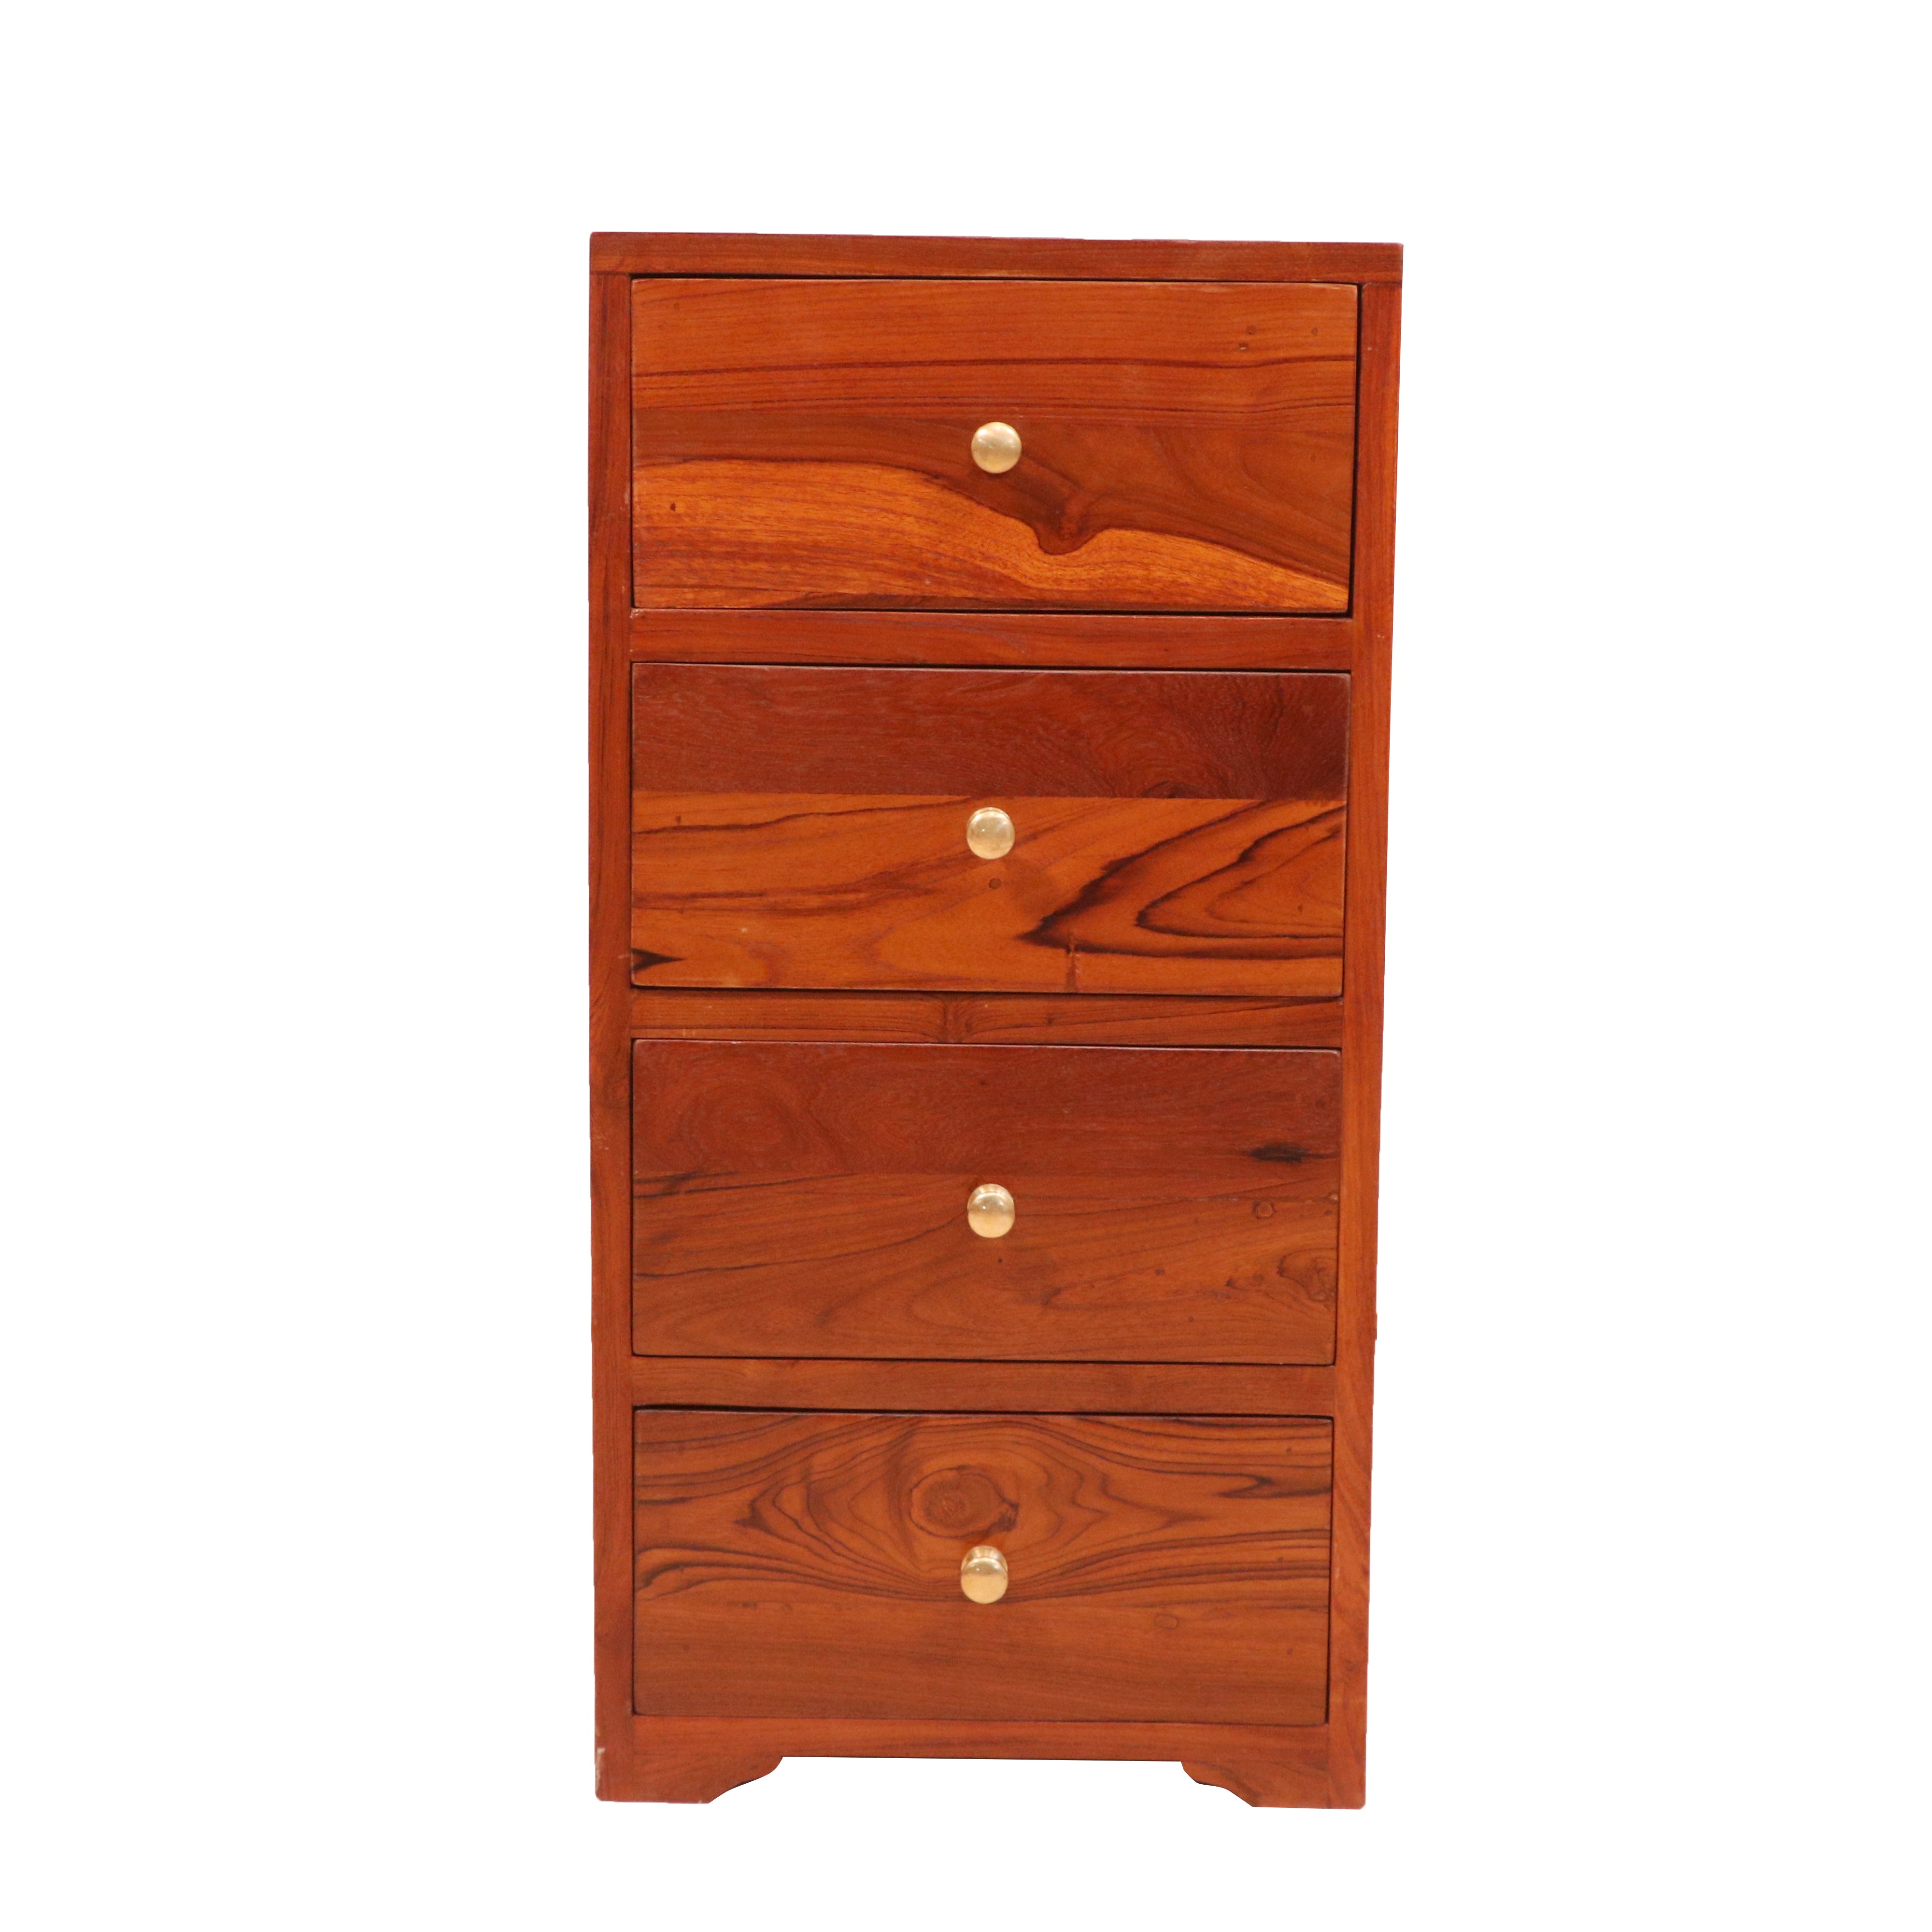 Travers Rede Themed Handmade Classic Wooden four Chest Drawers for Office Drawer's Chest